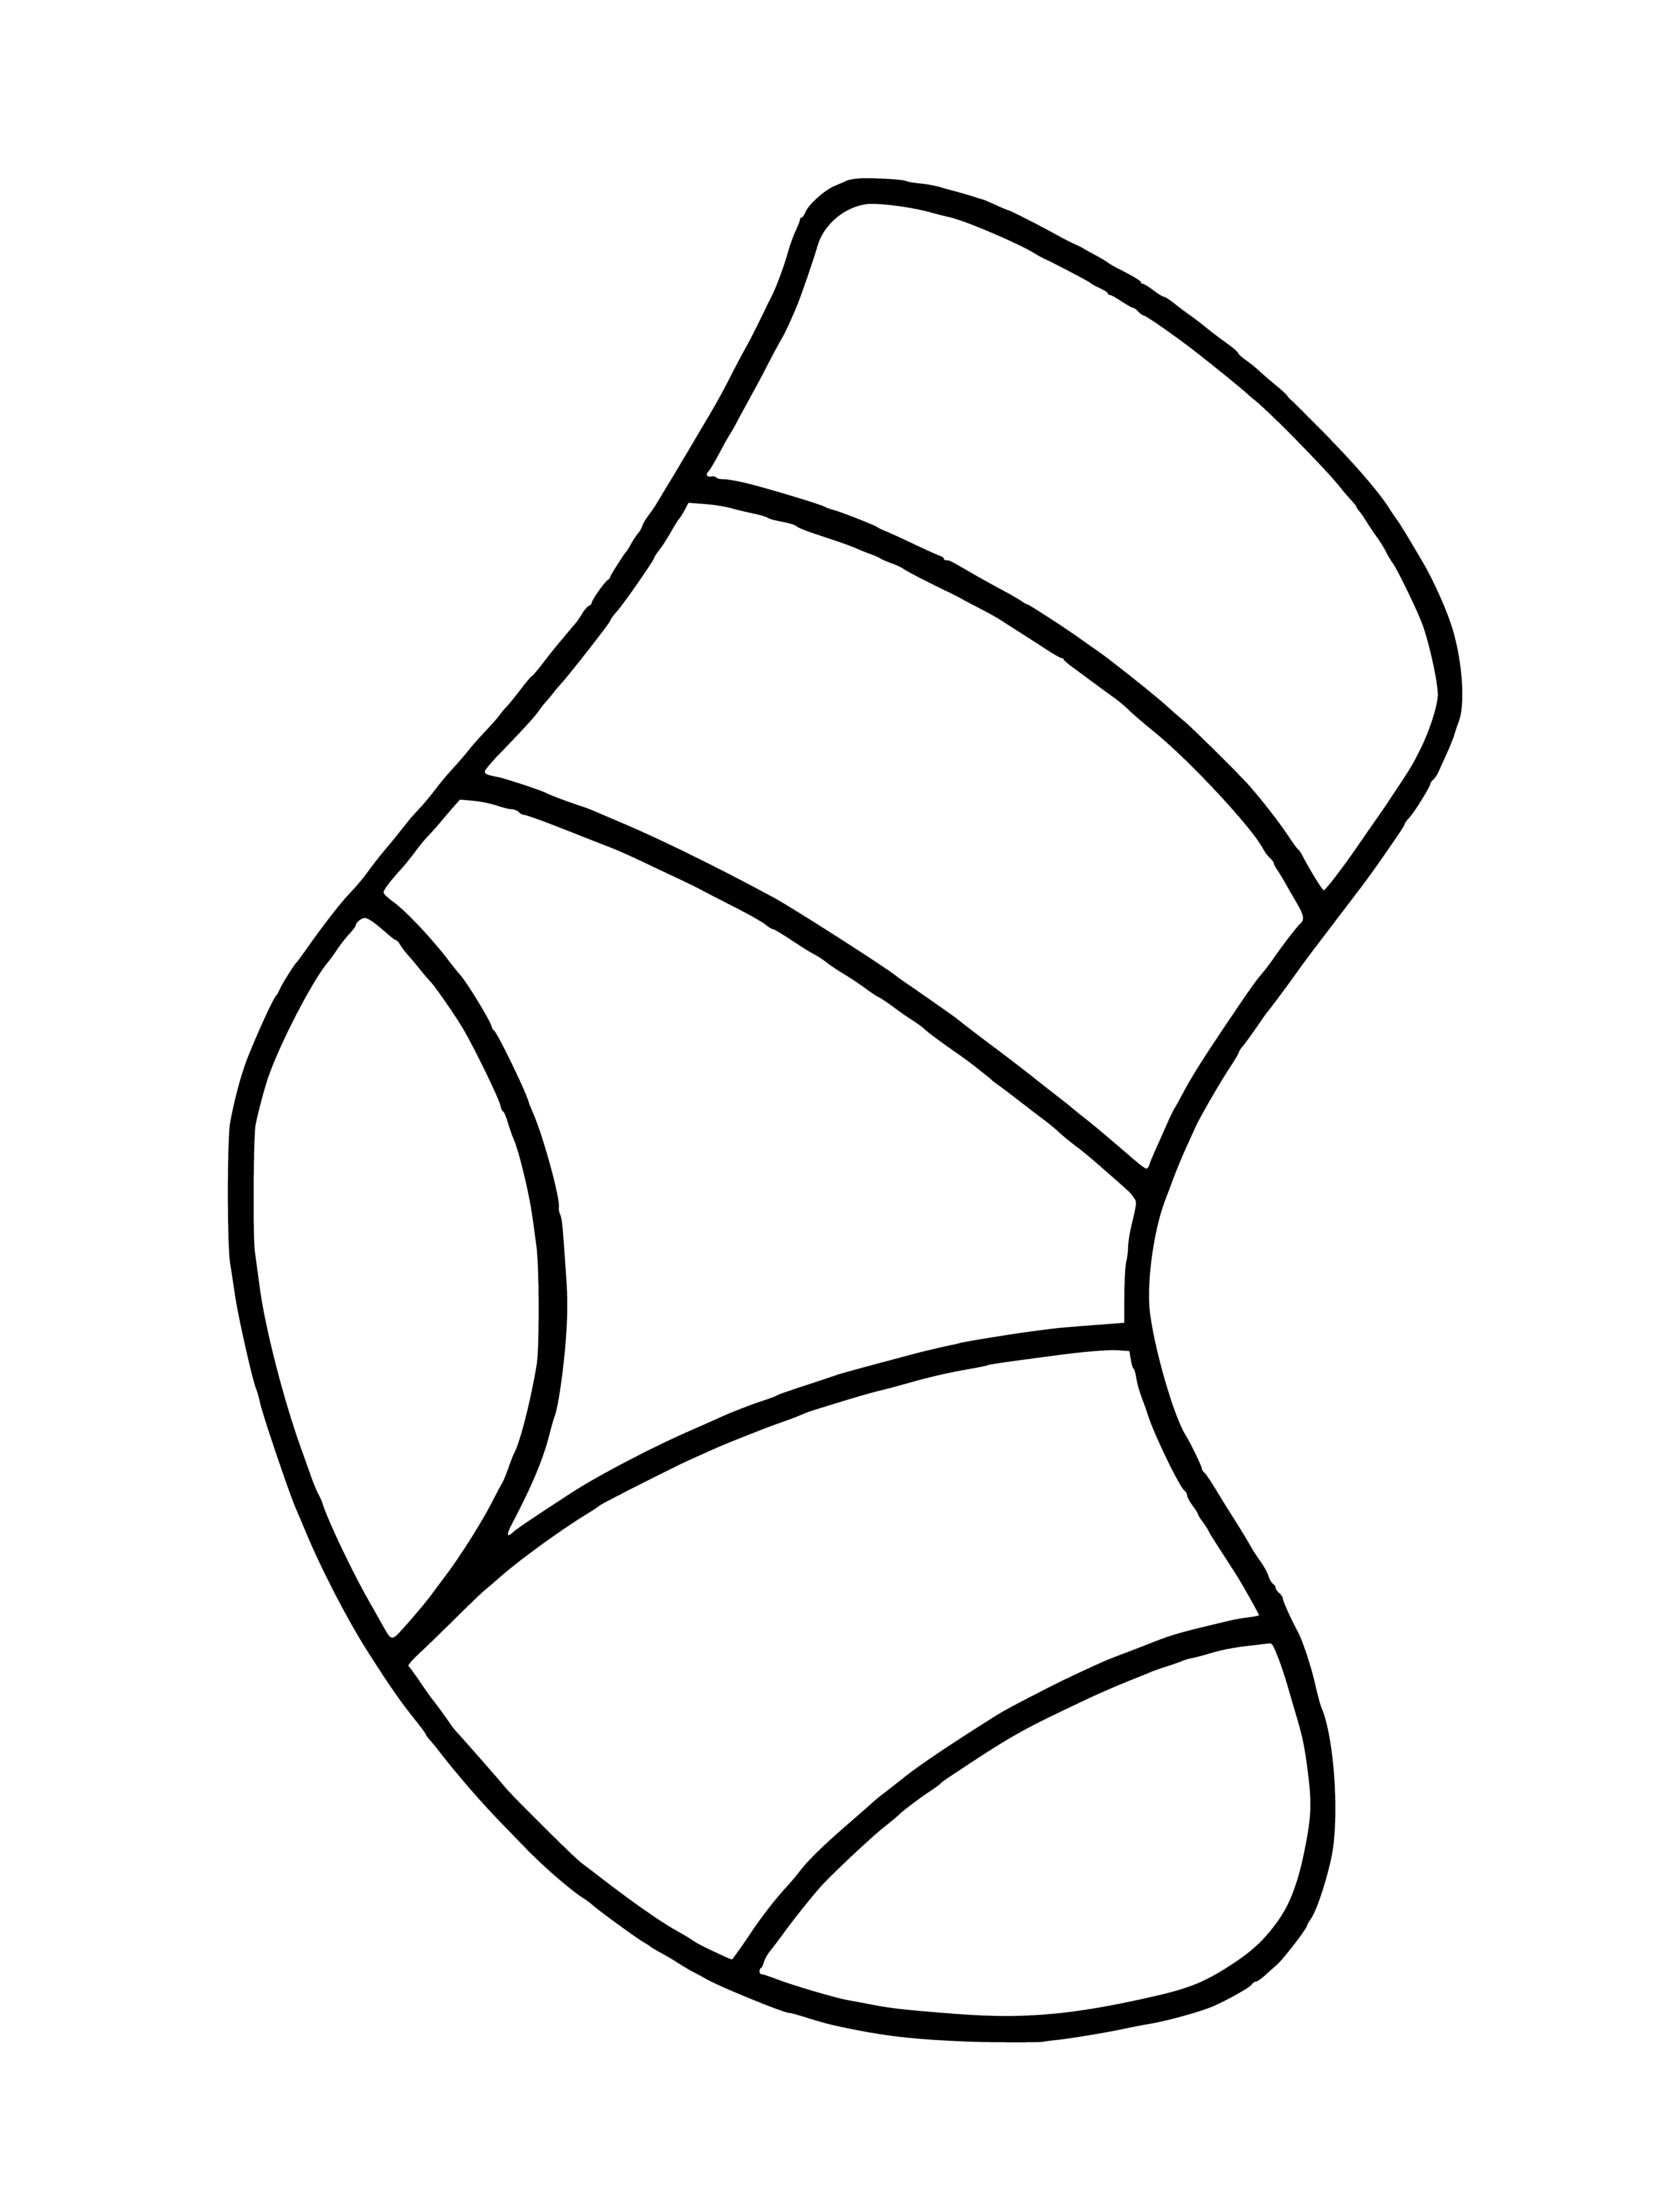 coloring page: Coloring page of a white sock with green stripe and elastic band. Soft fabric to color.